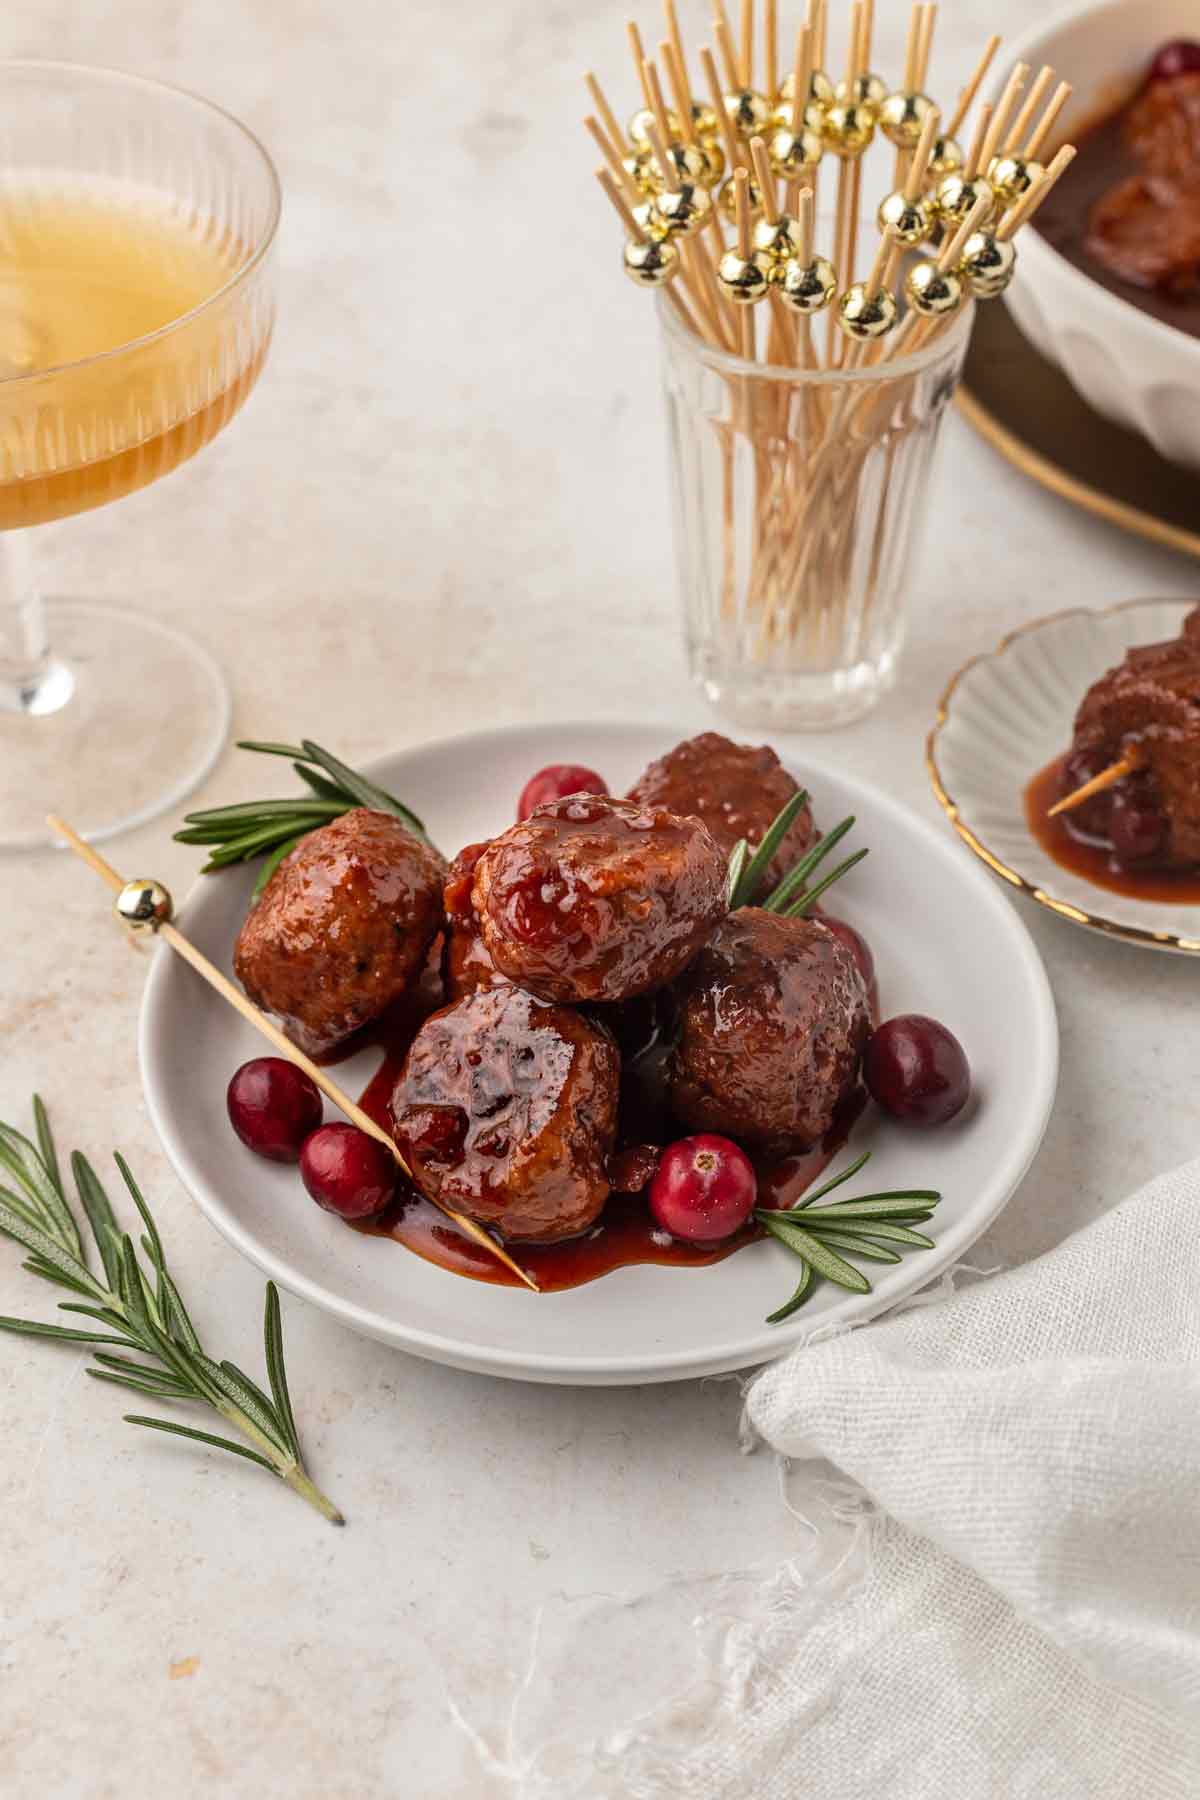 Cranberry Turkey Meatballs made with Frozen Meatballs